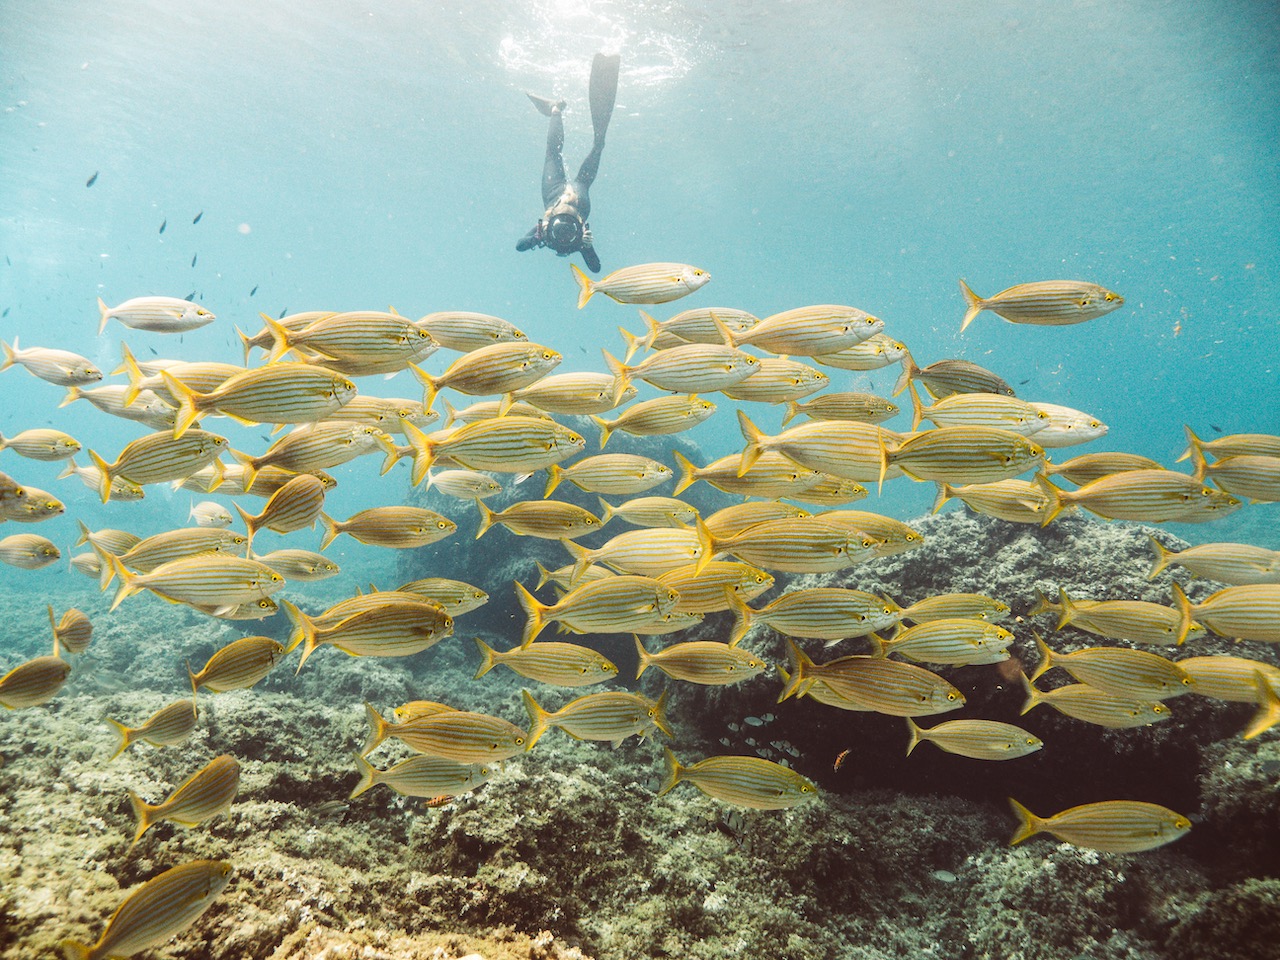 a freediver dives down to take a look at a yellow school of fish